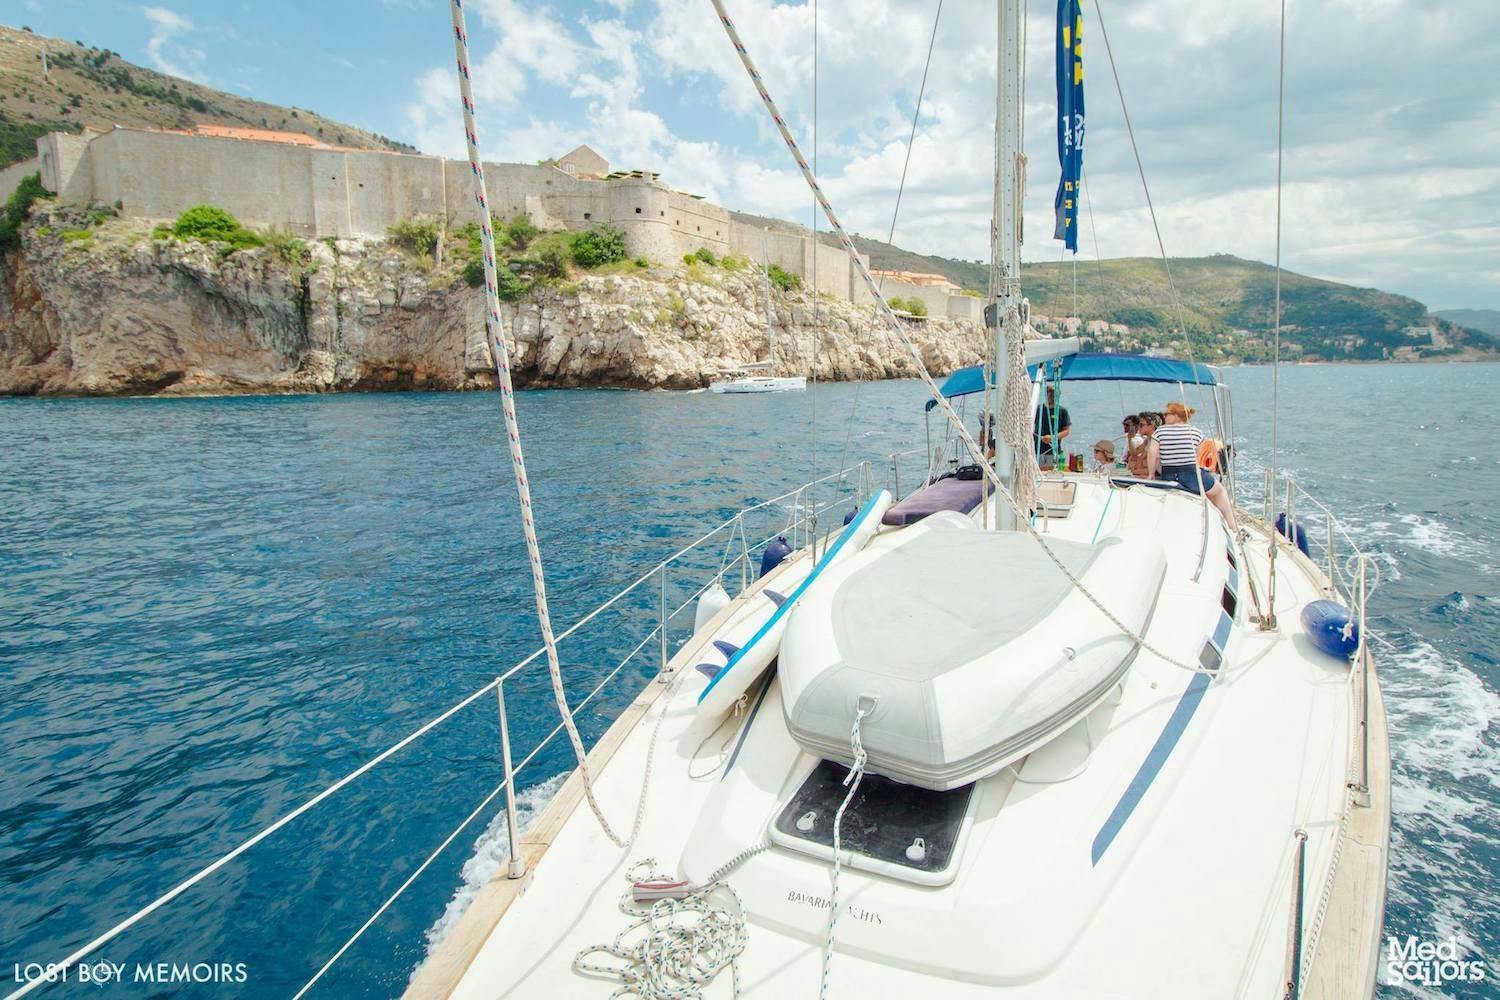 Dubrovnik Medsailors Voyager Route. 6 Things you'll learn in Dubrovnik showing the old city from a Medsailors sailing yacht. Photo by Ryan Brown of Lostboymemoirs.com